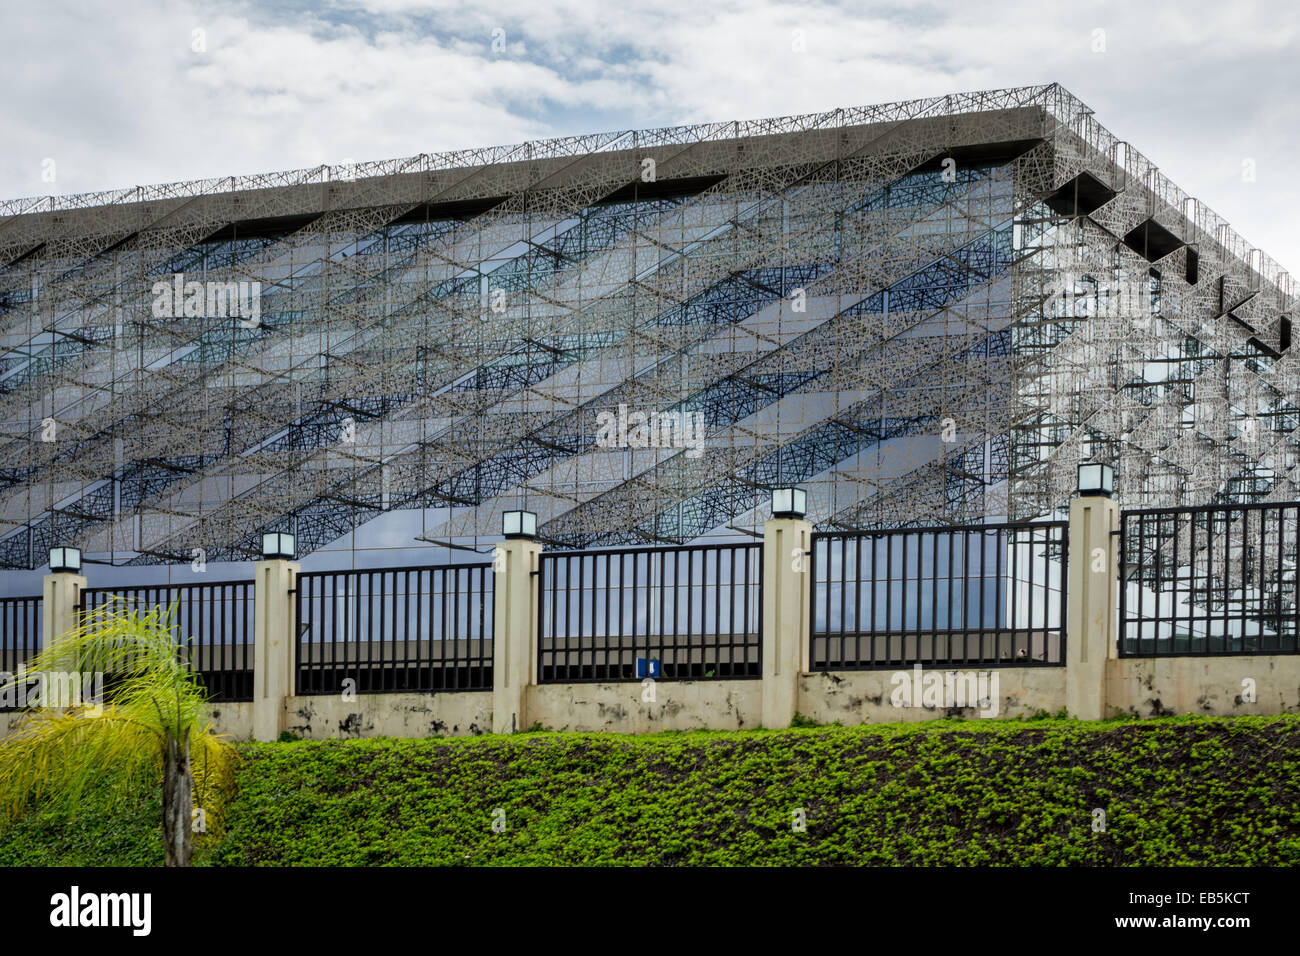 Facade of modern convention or conference center building in the capital city of Malabo, Equatorial Guinea, Africa Stock Photo